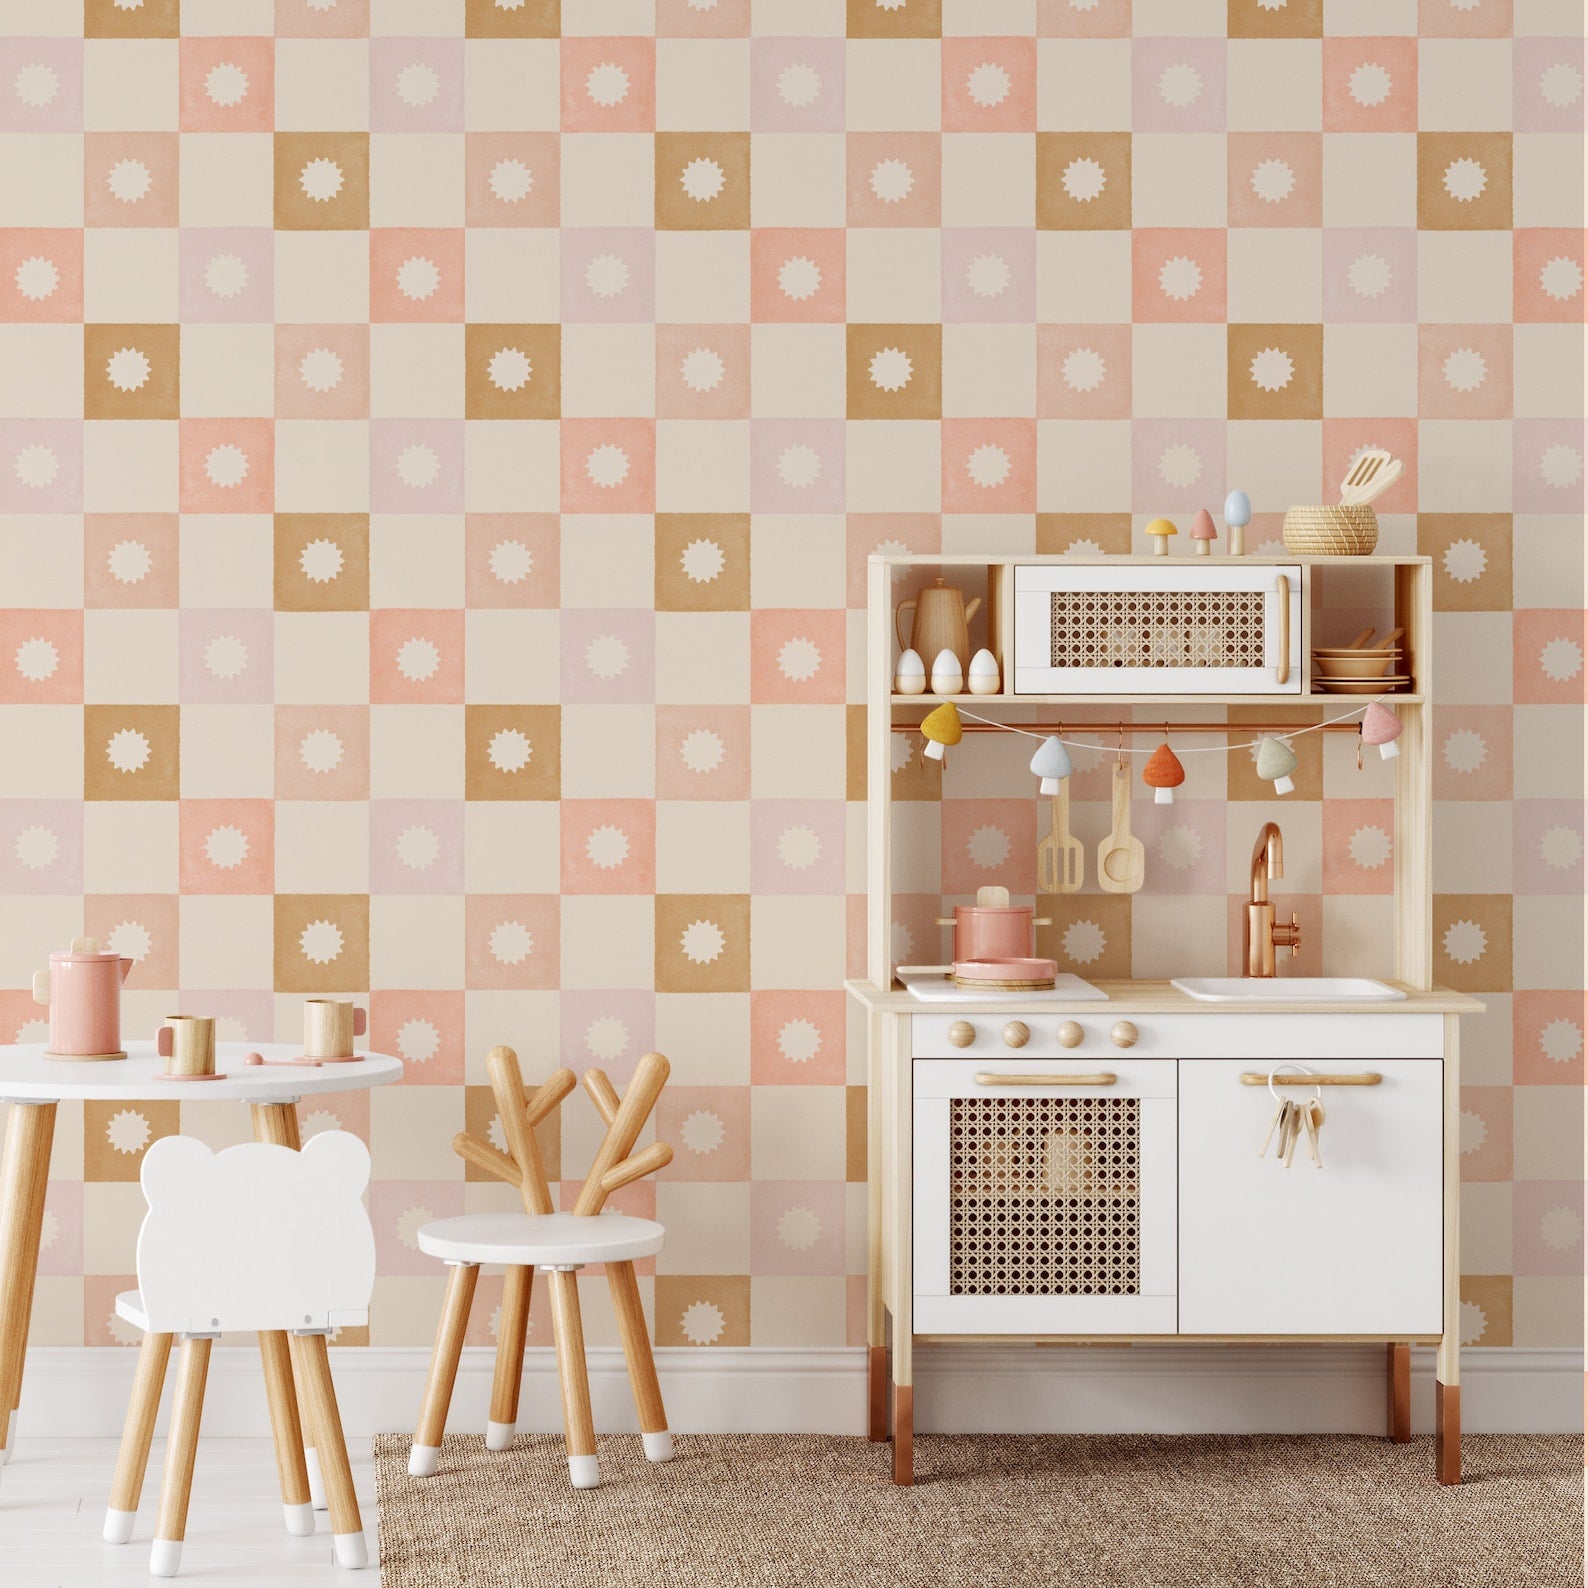 Children’s play area decorated with Coralie Wallpaper, featuring pastel-toned squares and sunburst patterns. The space is furnished with a small wooden play kitchen and child-sized furniture, making it bright and cheerful.